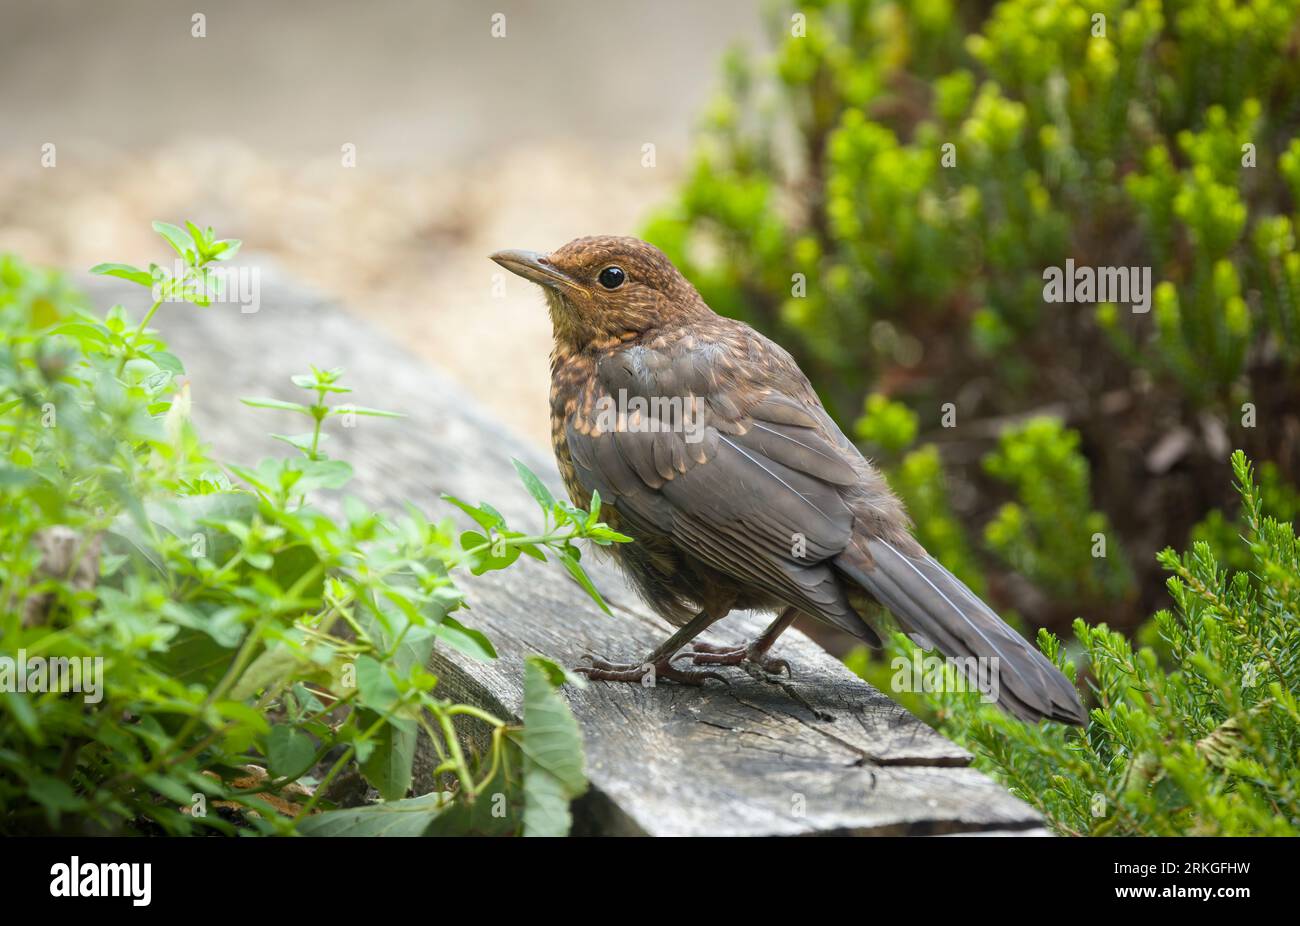 Juvenile common blackbird (Turdus merula) with mottled brown feathers foraging in a UK garden Stock Photo